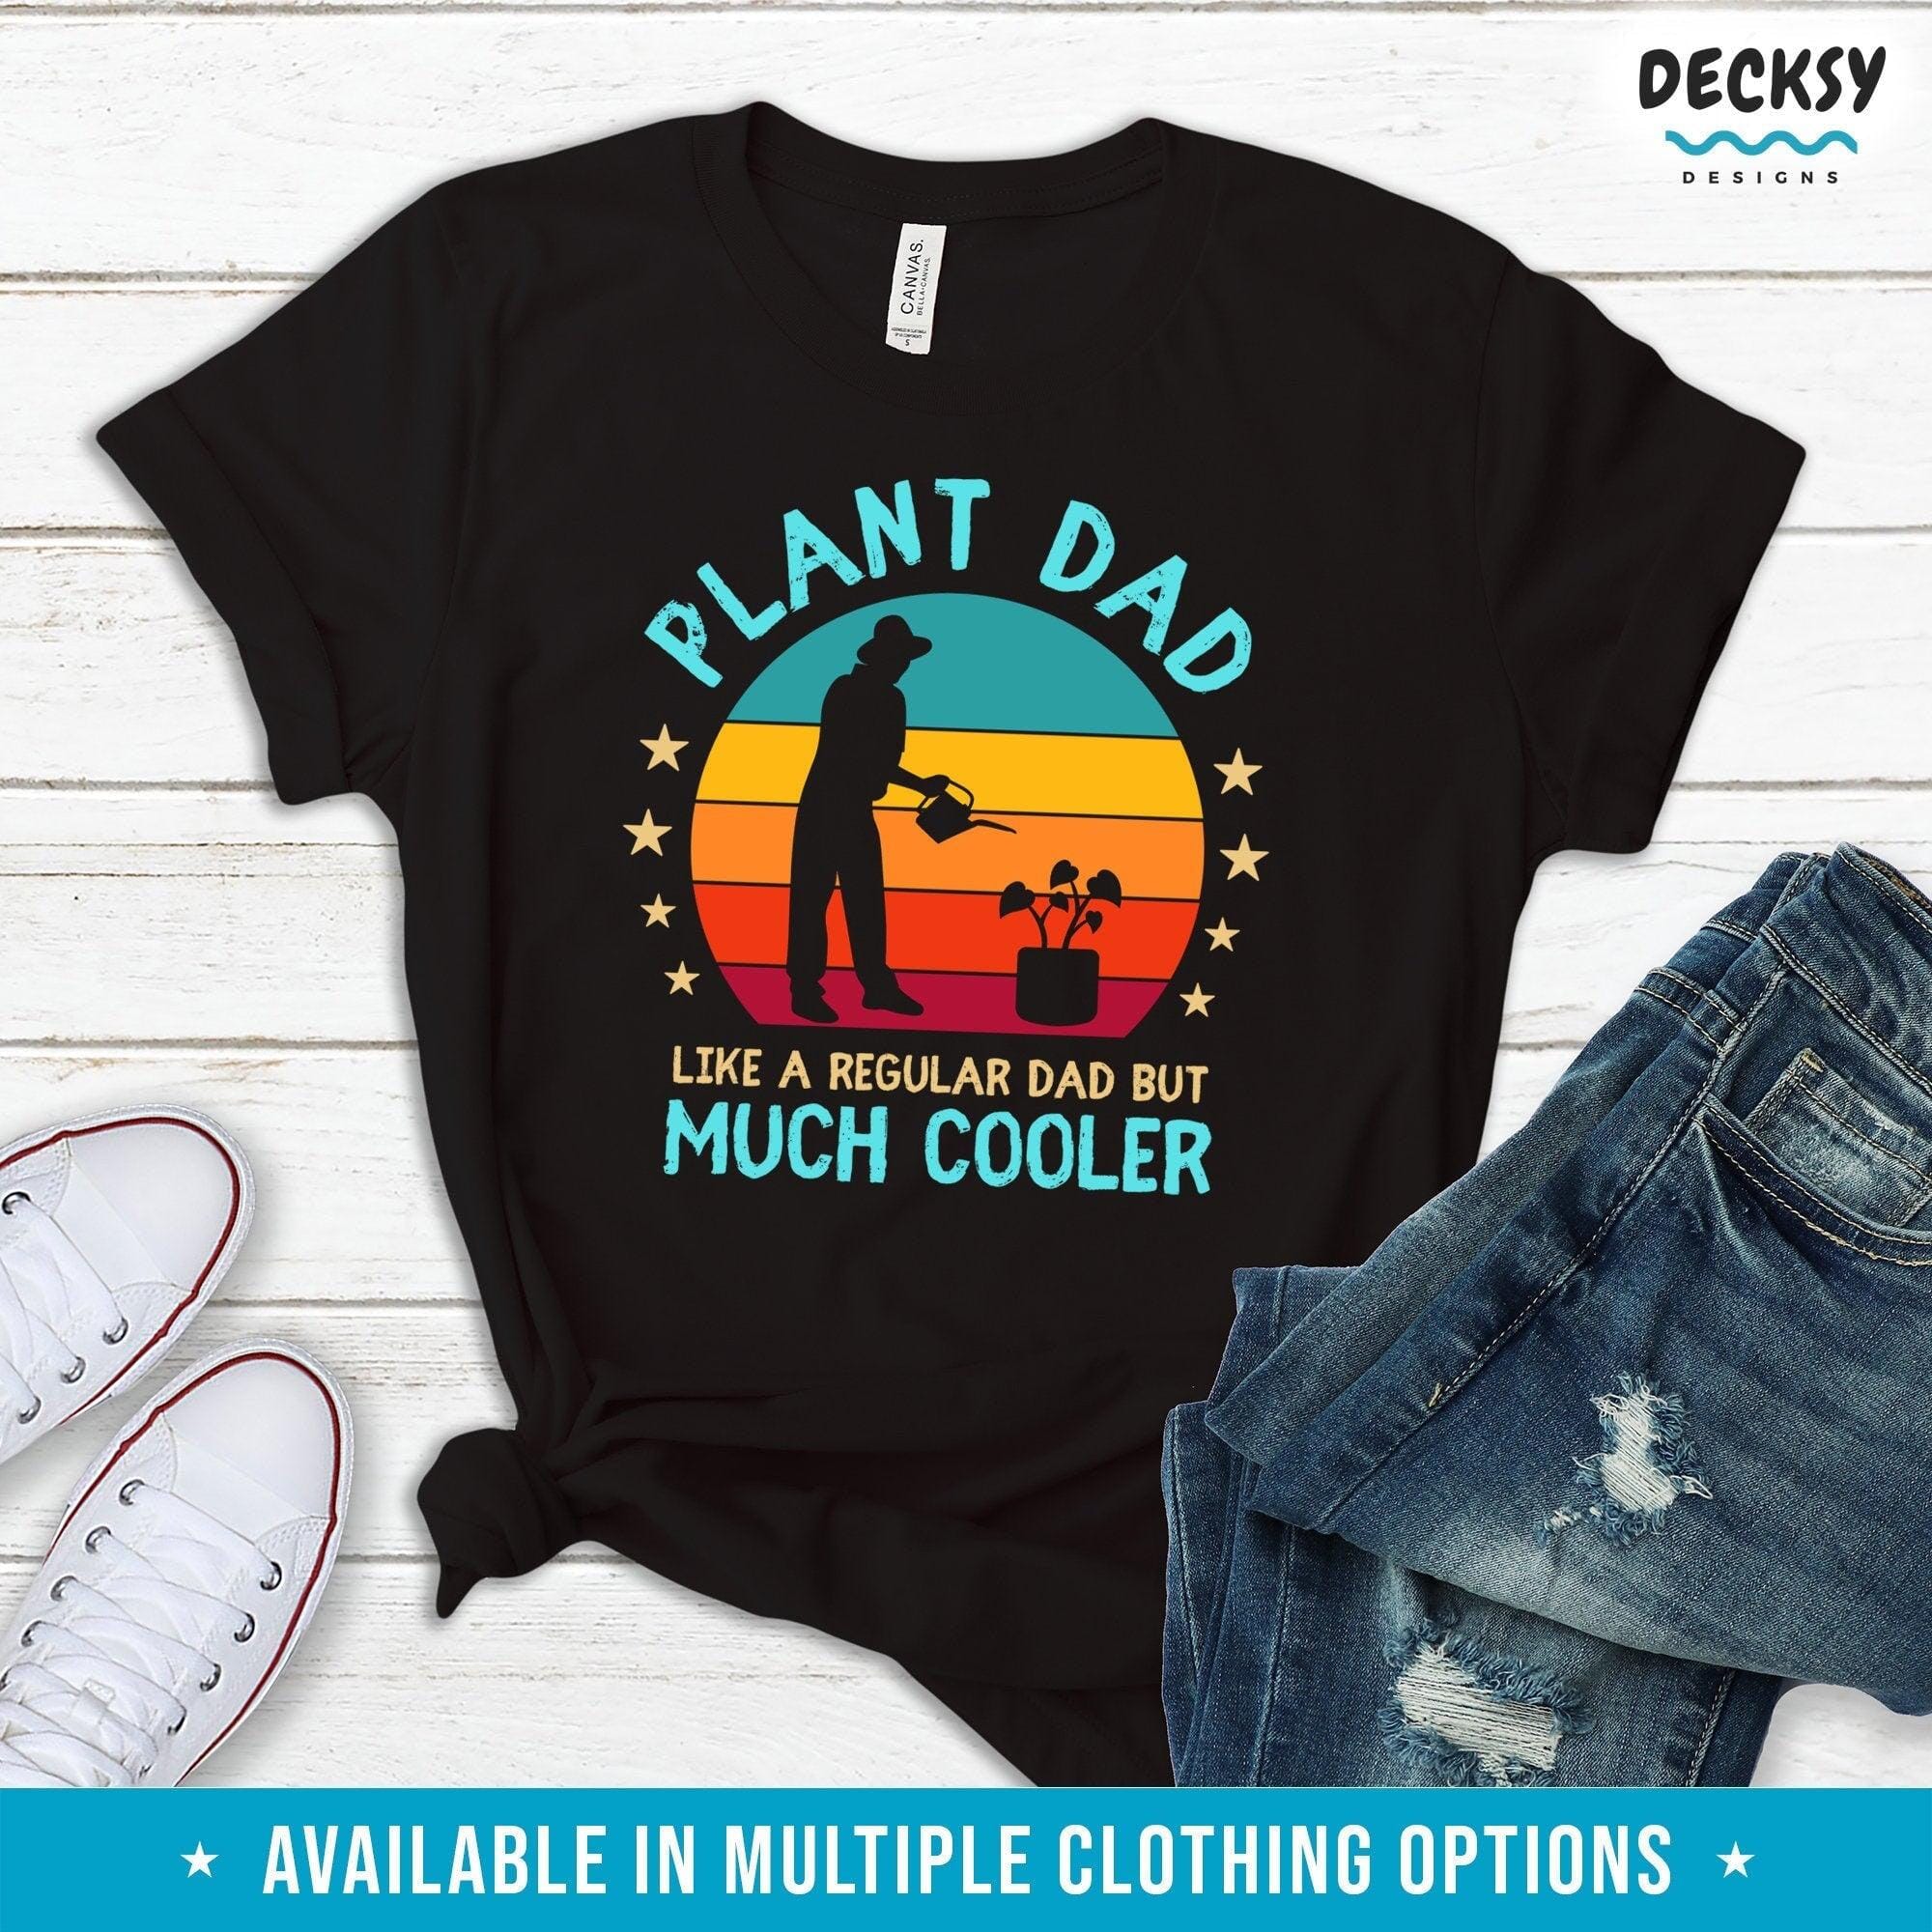 Plant Dad Shirt, Mens Gardening Gift-Clothing:Gender-Neutral Adult Clothing:Tops & Tees:T-shirts:Graphic Tees-DecksyDesigns